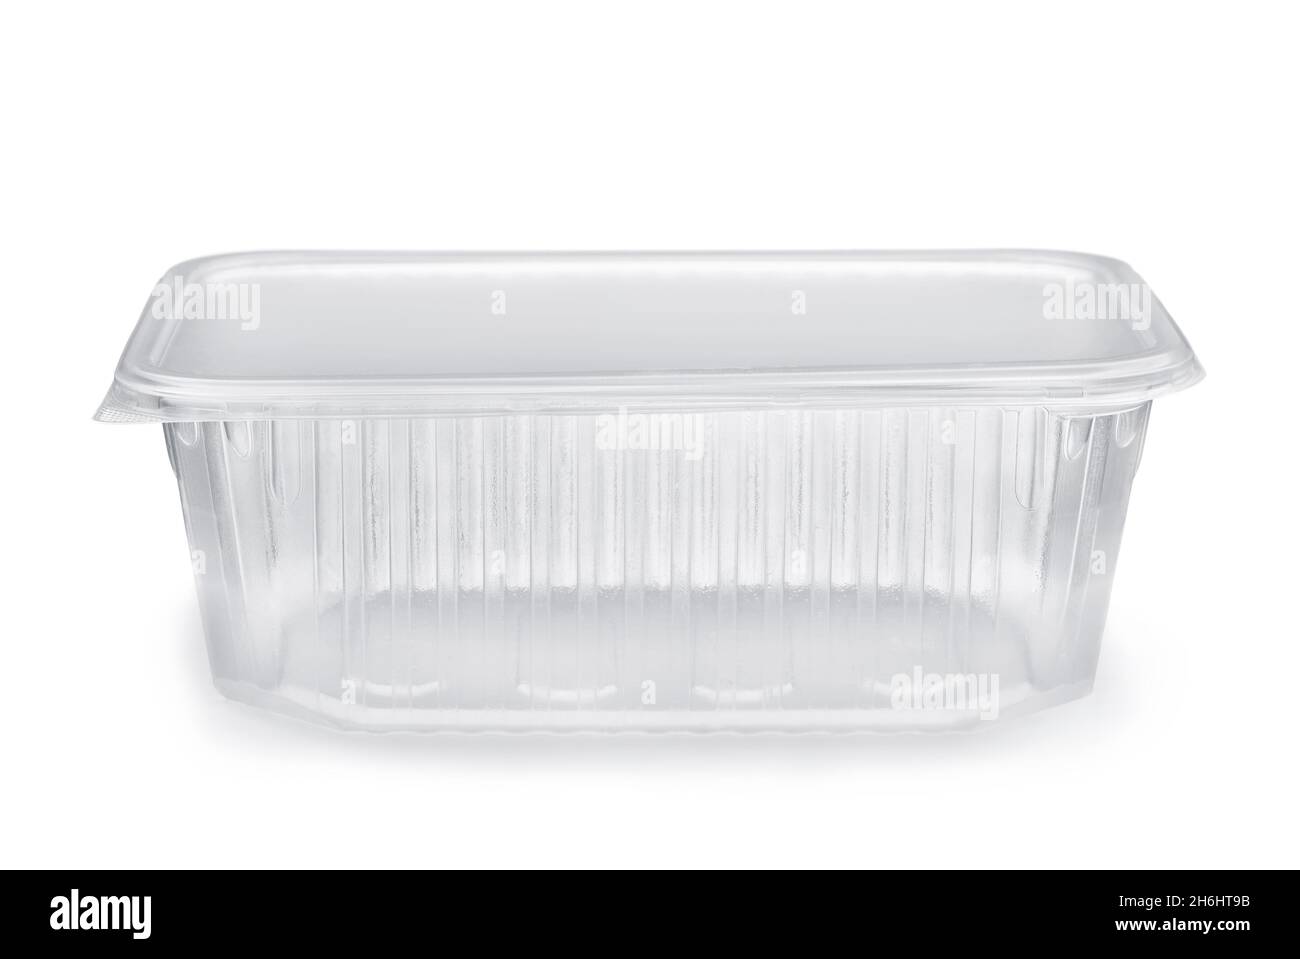 https://c8.alamy.com/comp/2H6HT9B/front-view-of-empty-transparent-disposable-plastic-food-container-isolated-on-white-2H6HT9B.jpg